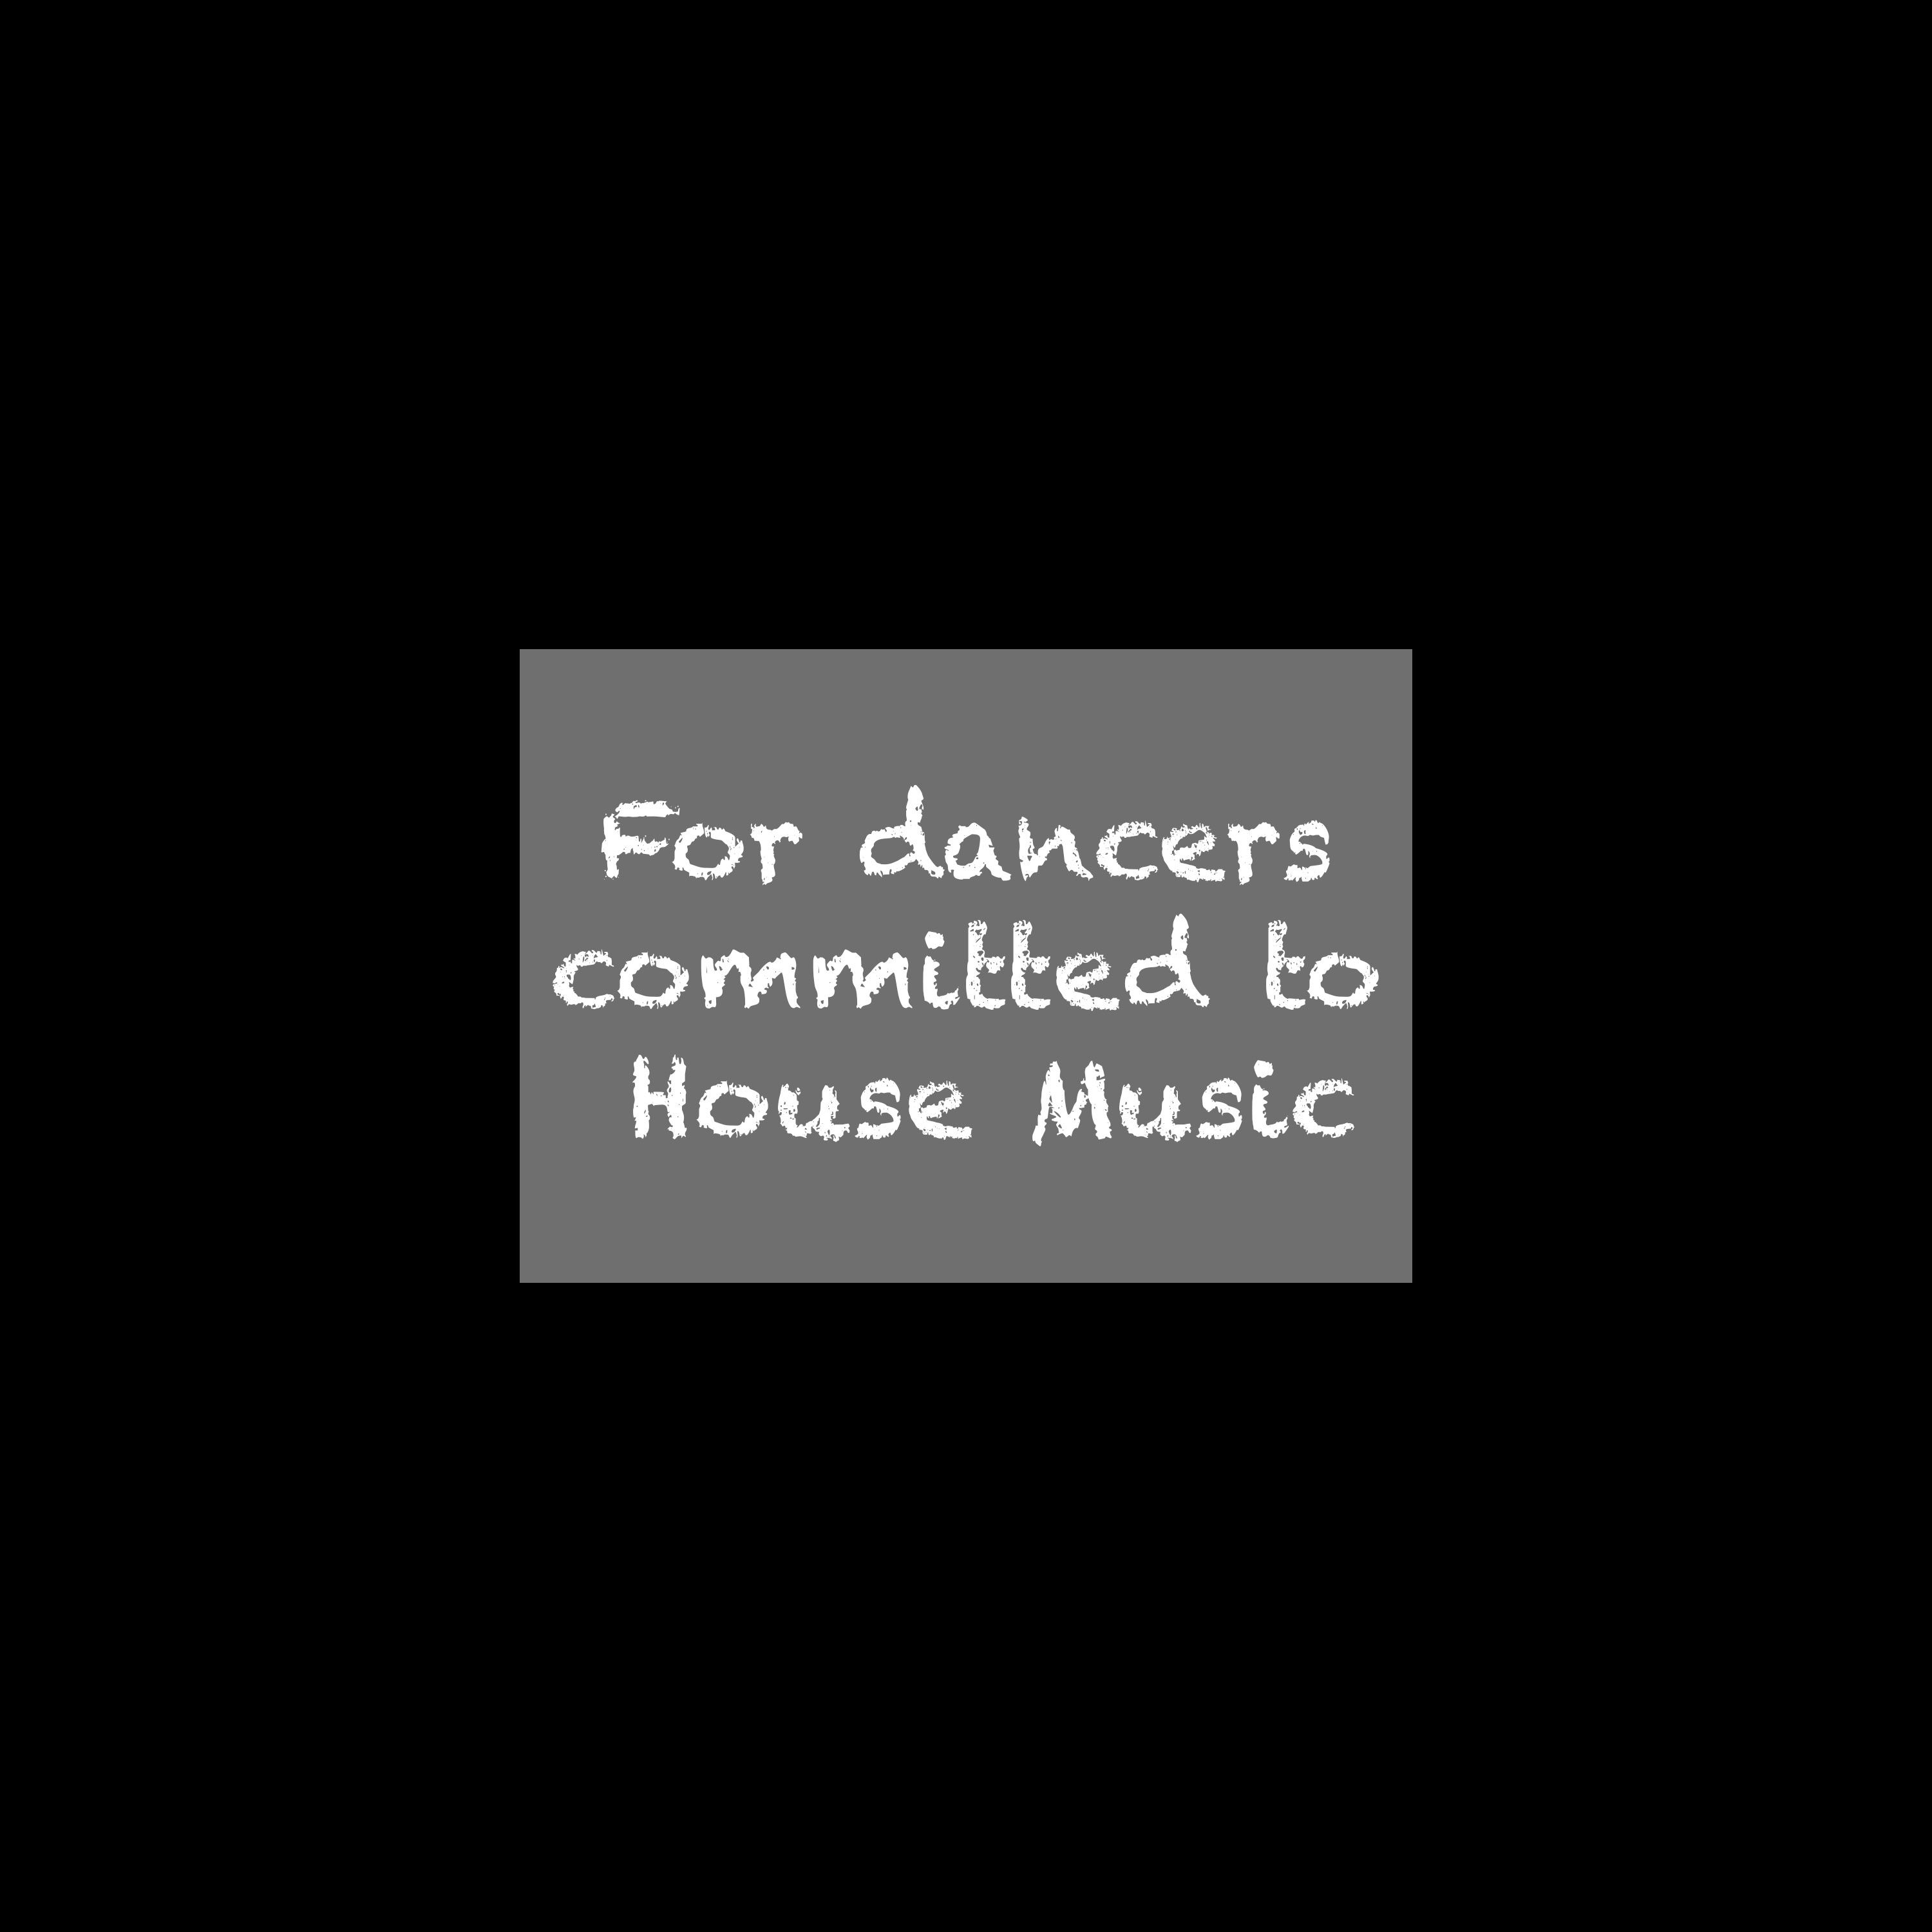 For dancers committed to House Music